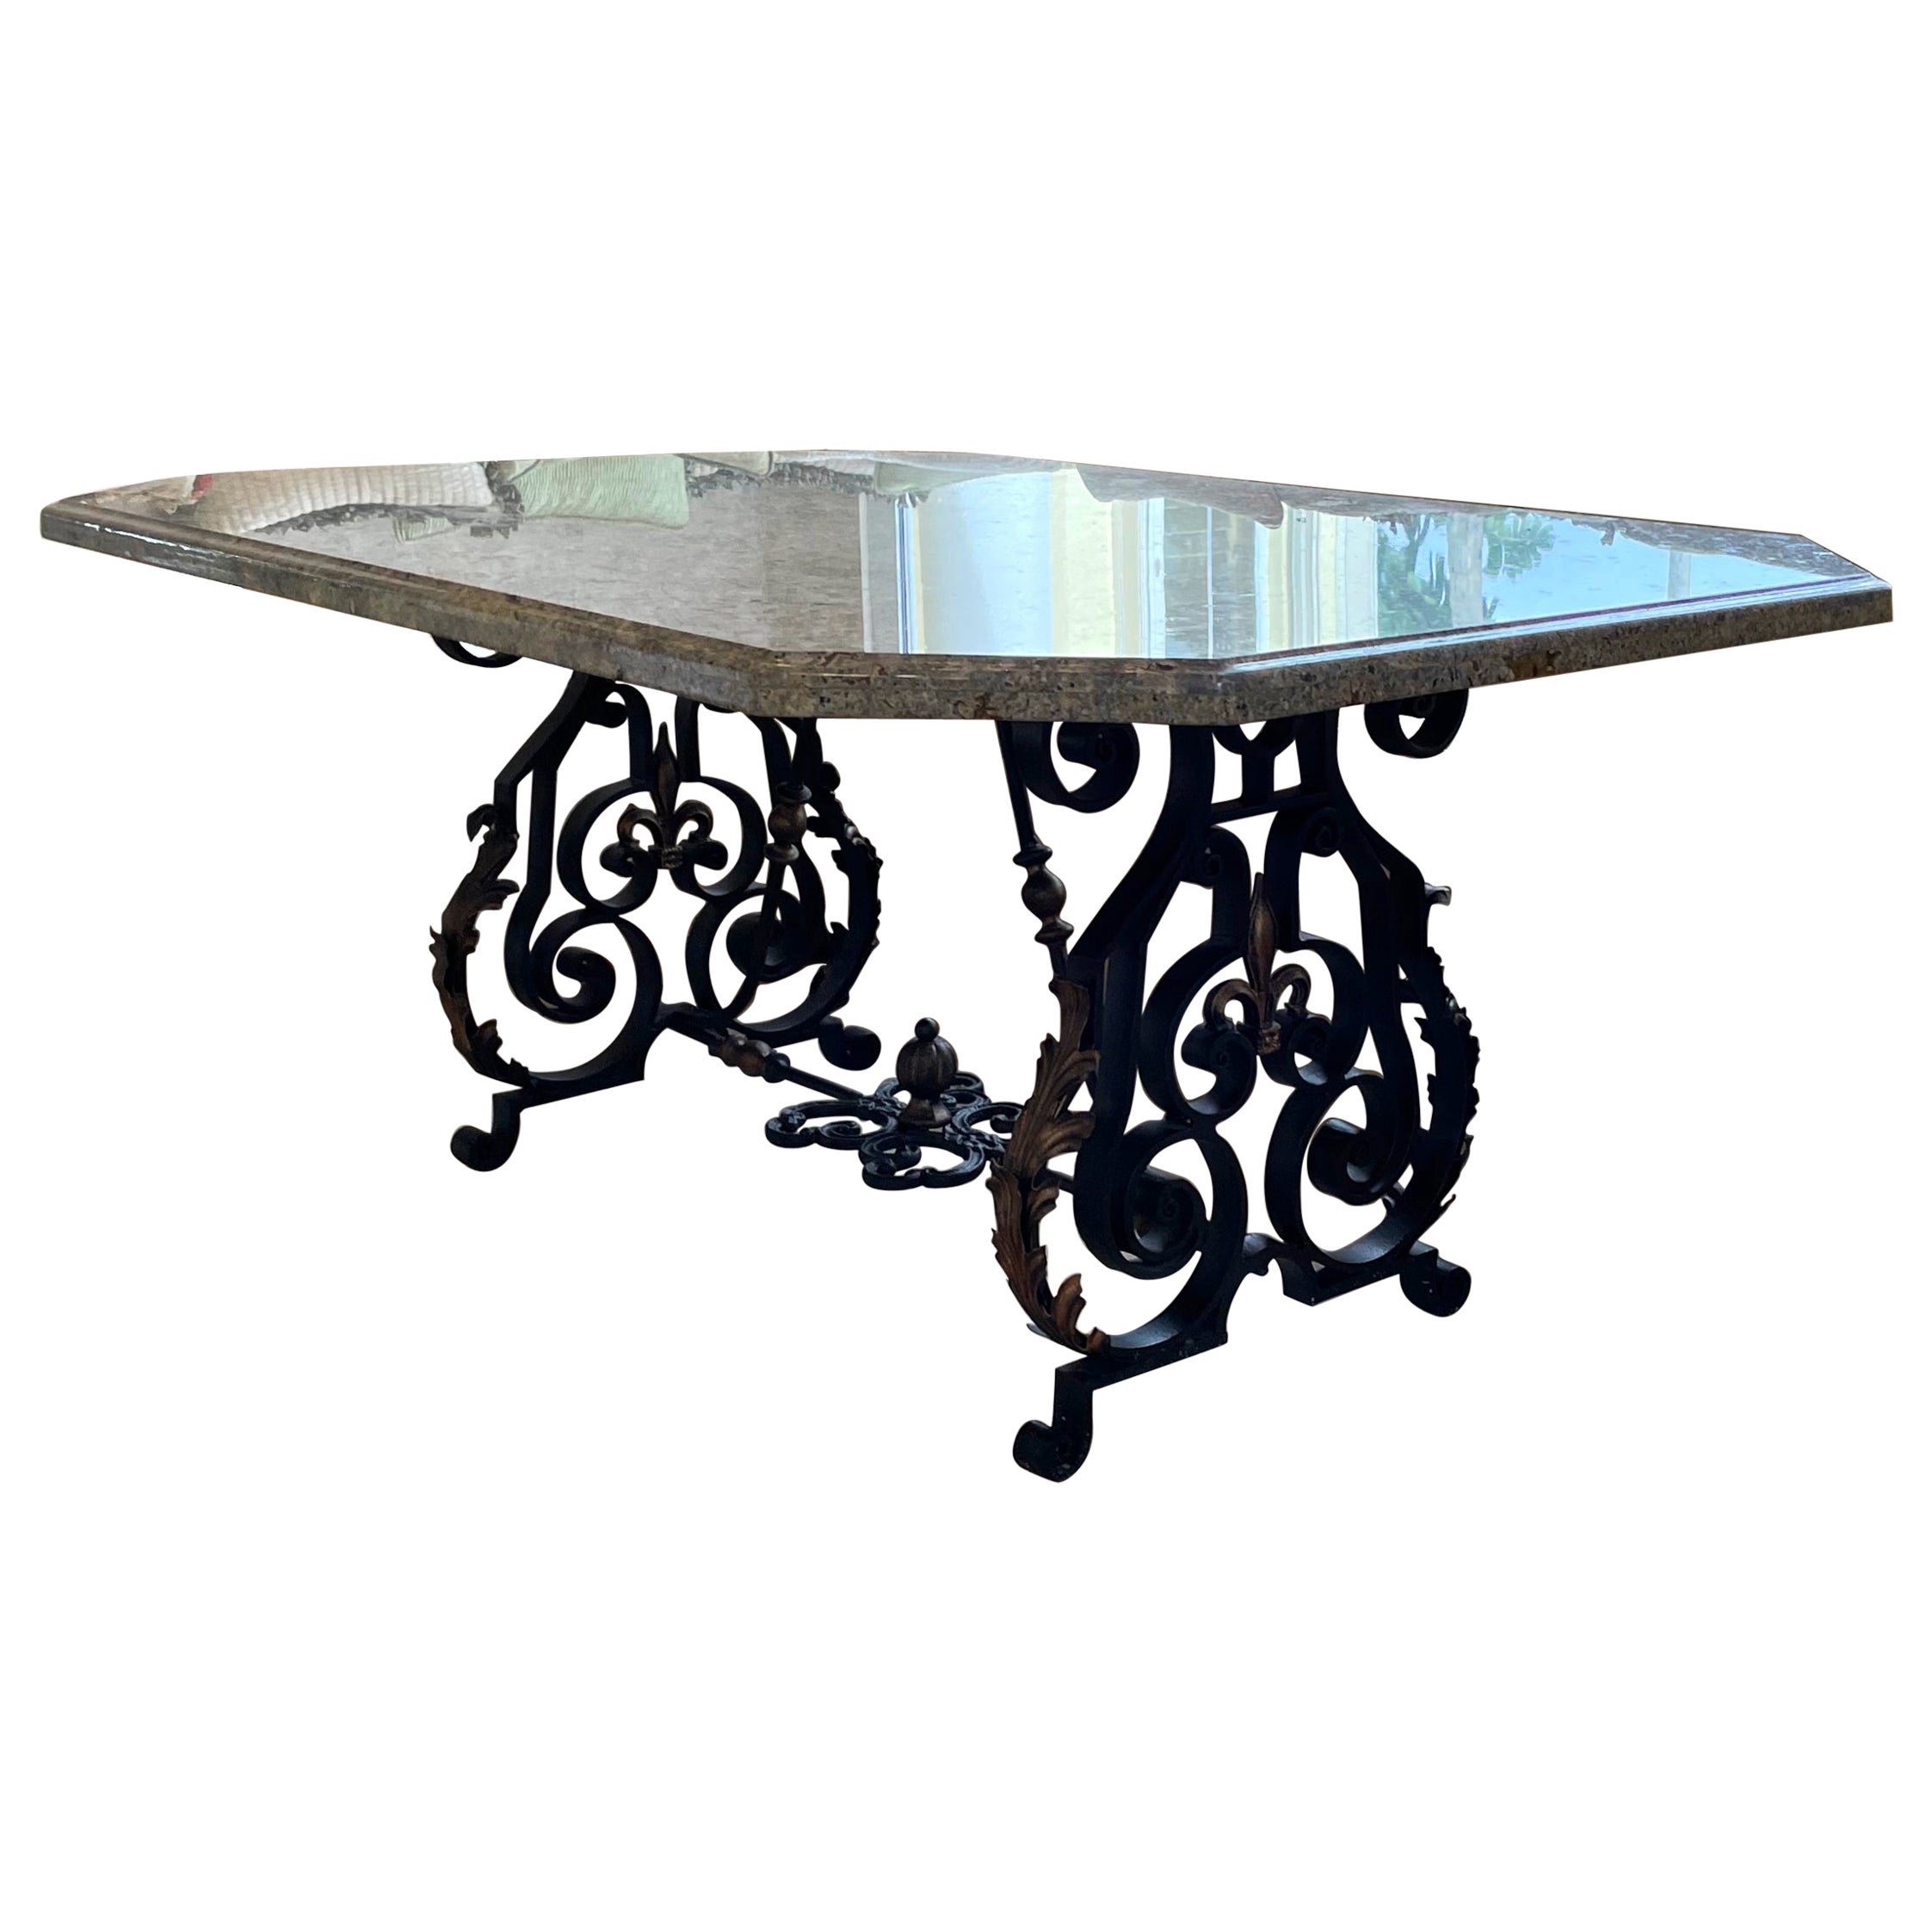 Faux Marble and Wrought Iron Dining Table